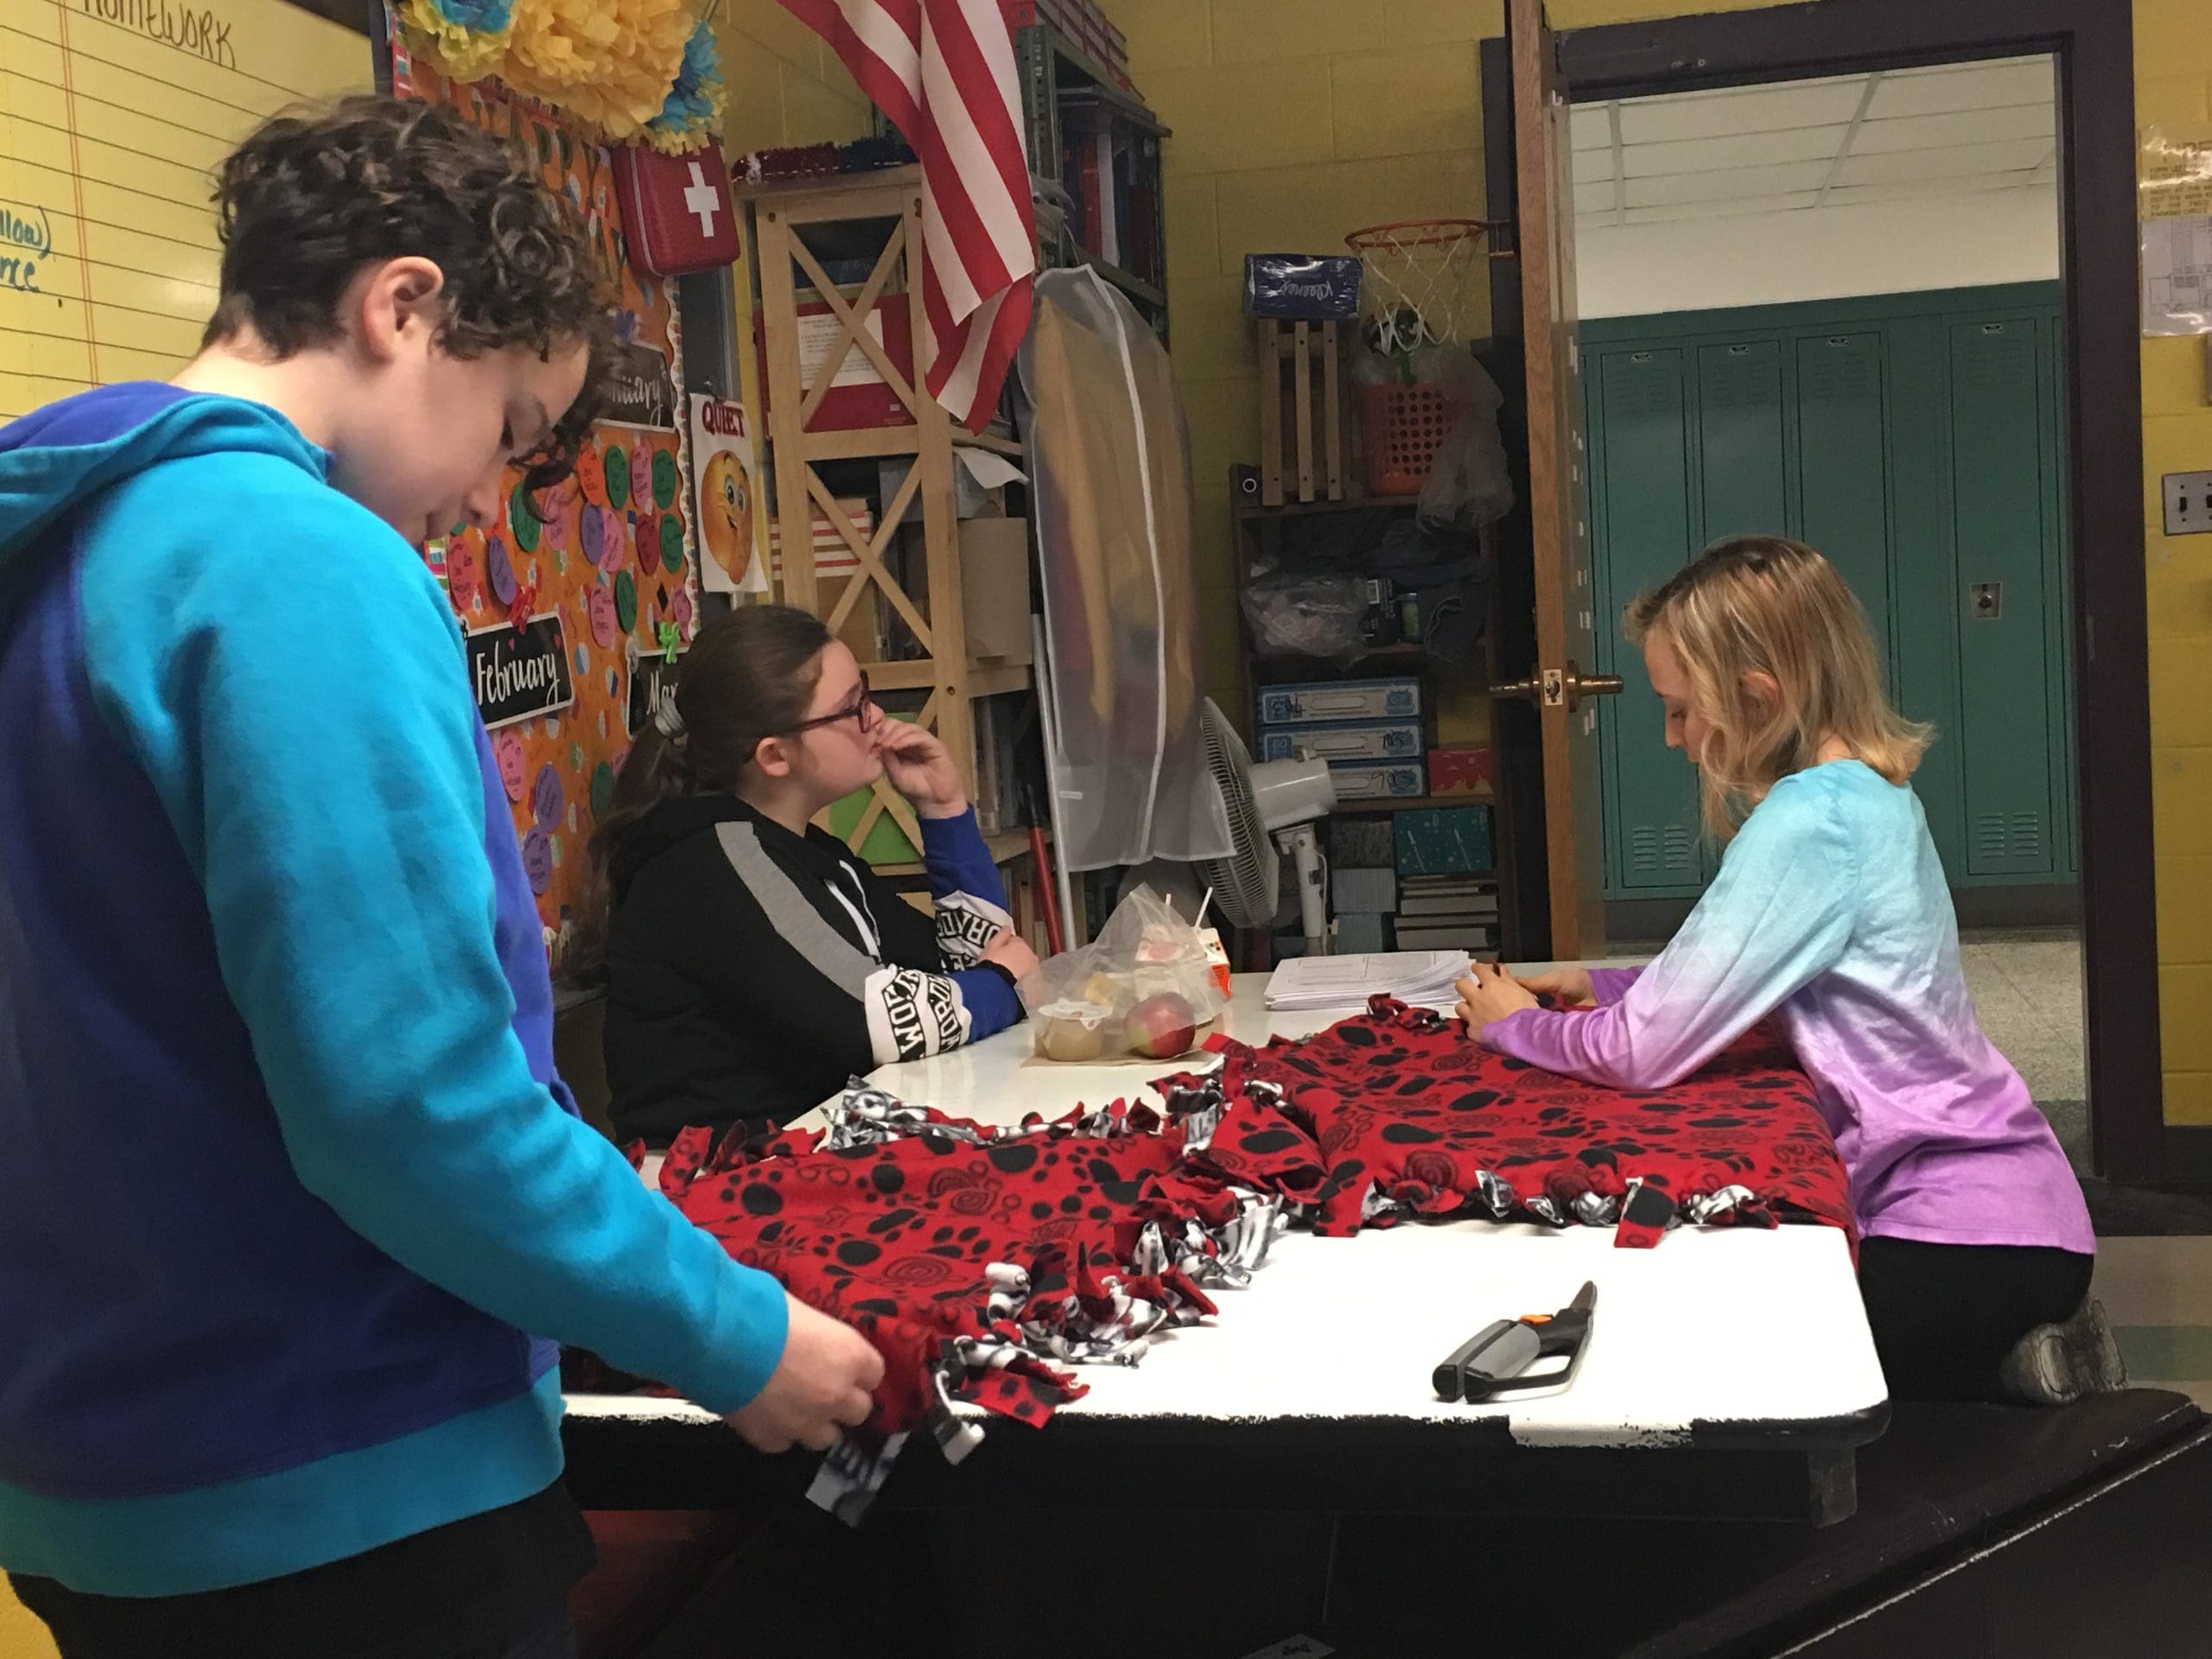 sudents working on making blankets